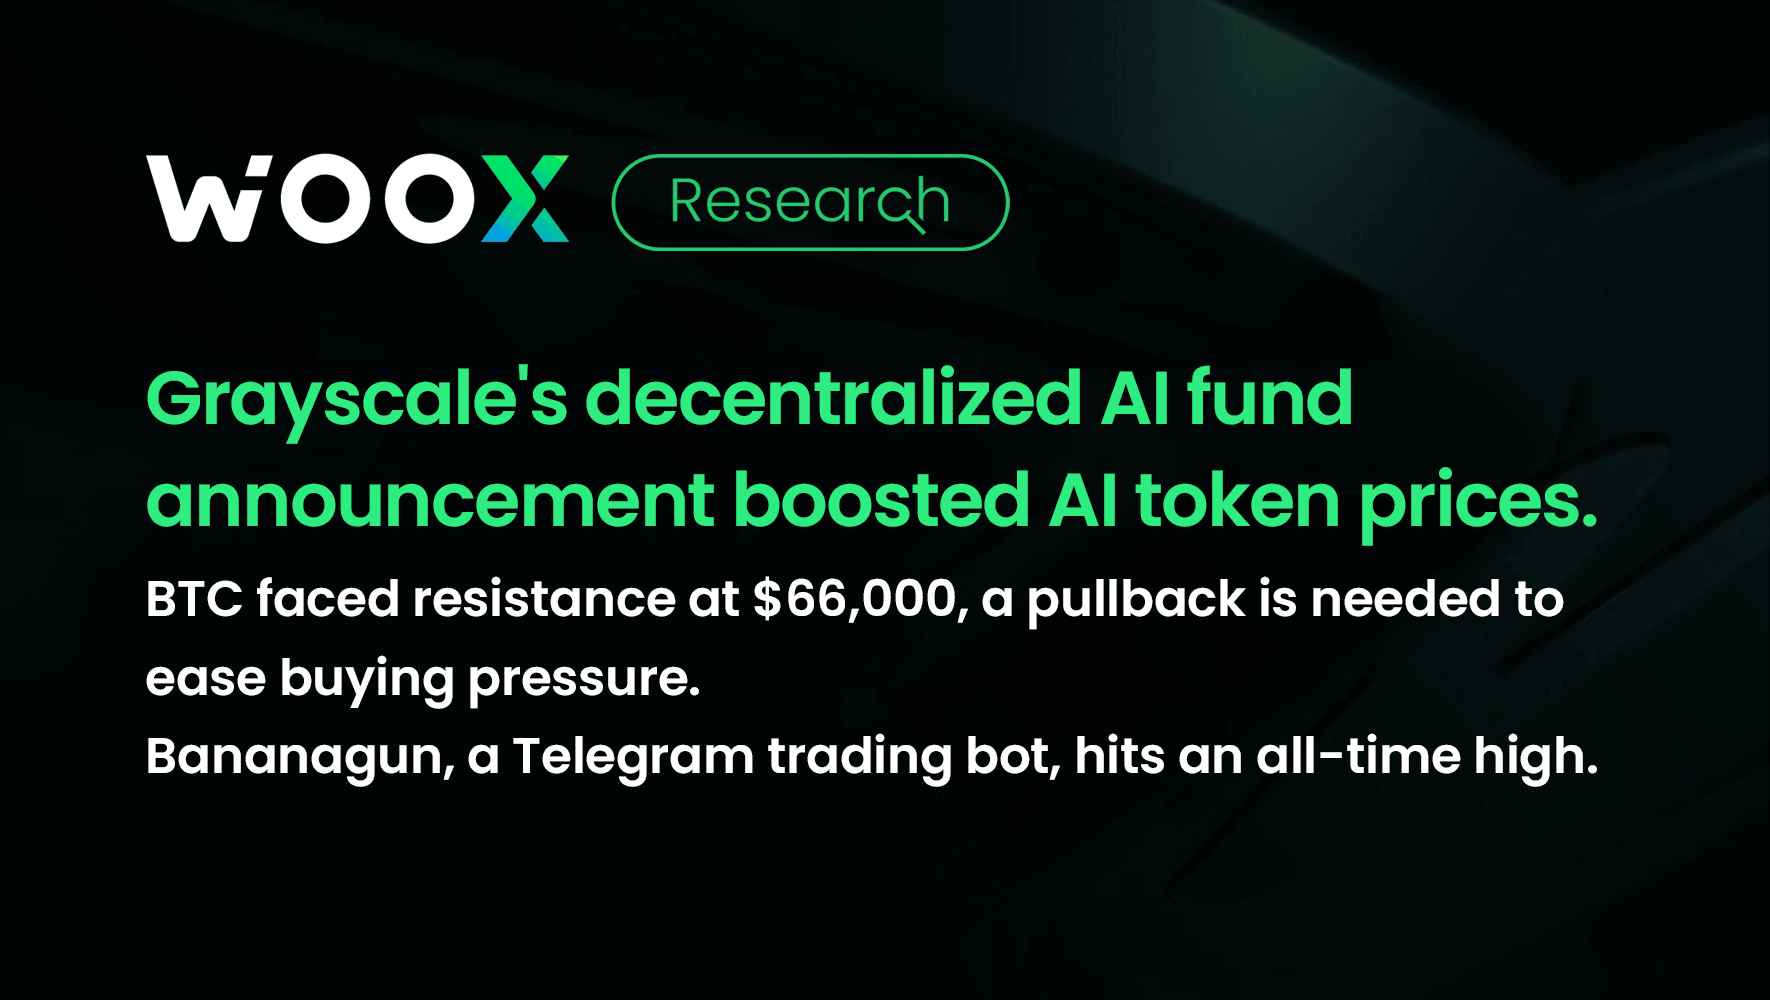 Grayscale's decentralized AI fund announcement boosted AI token prices.